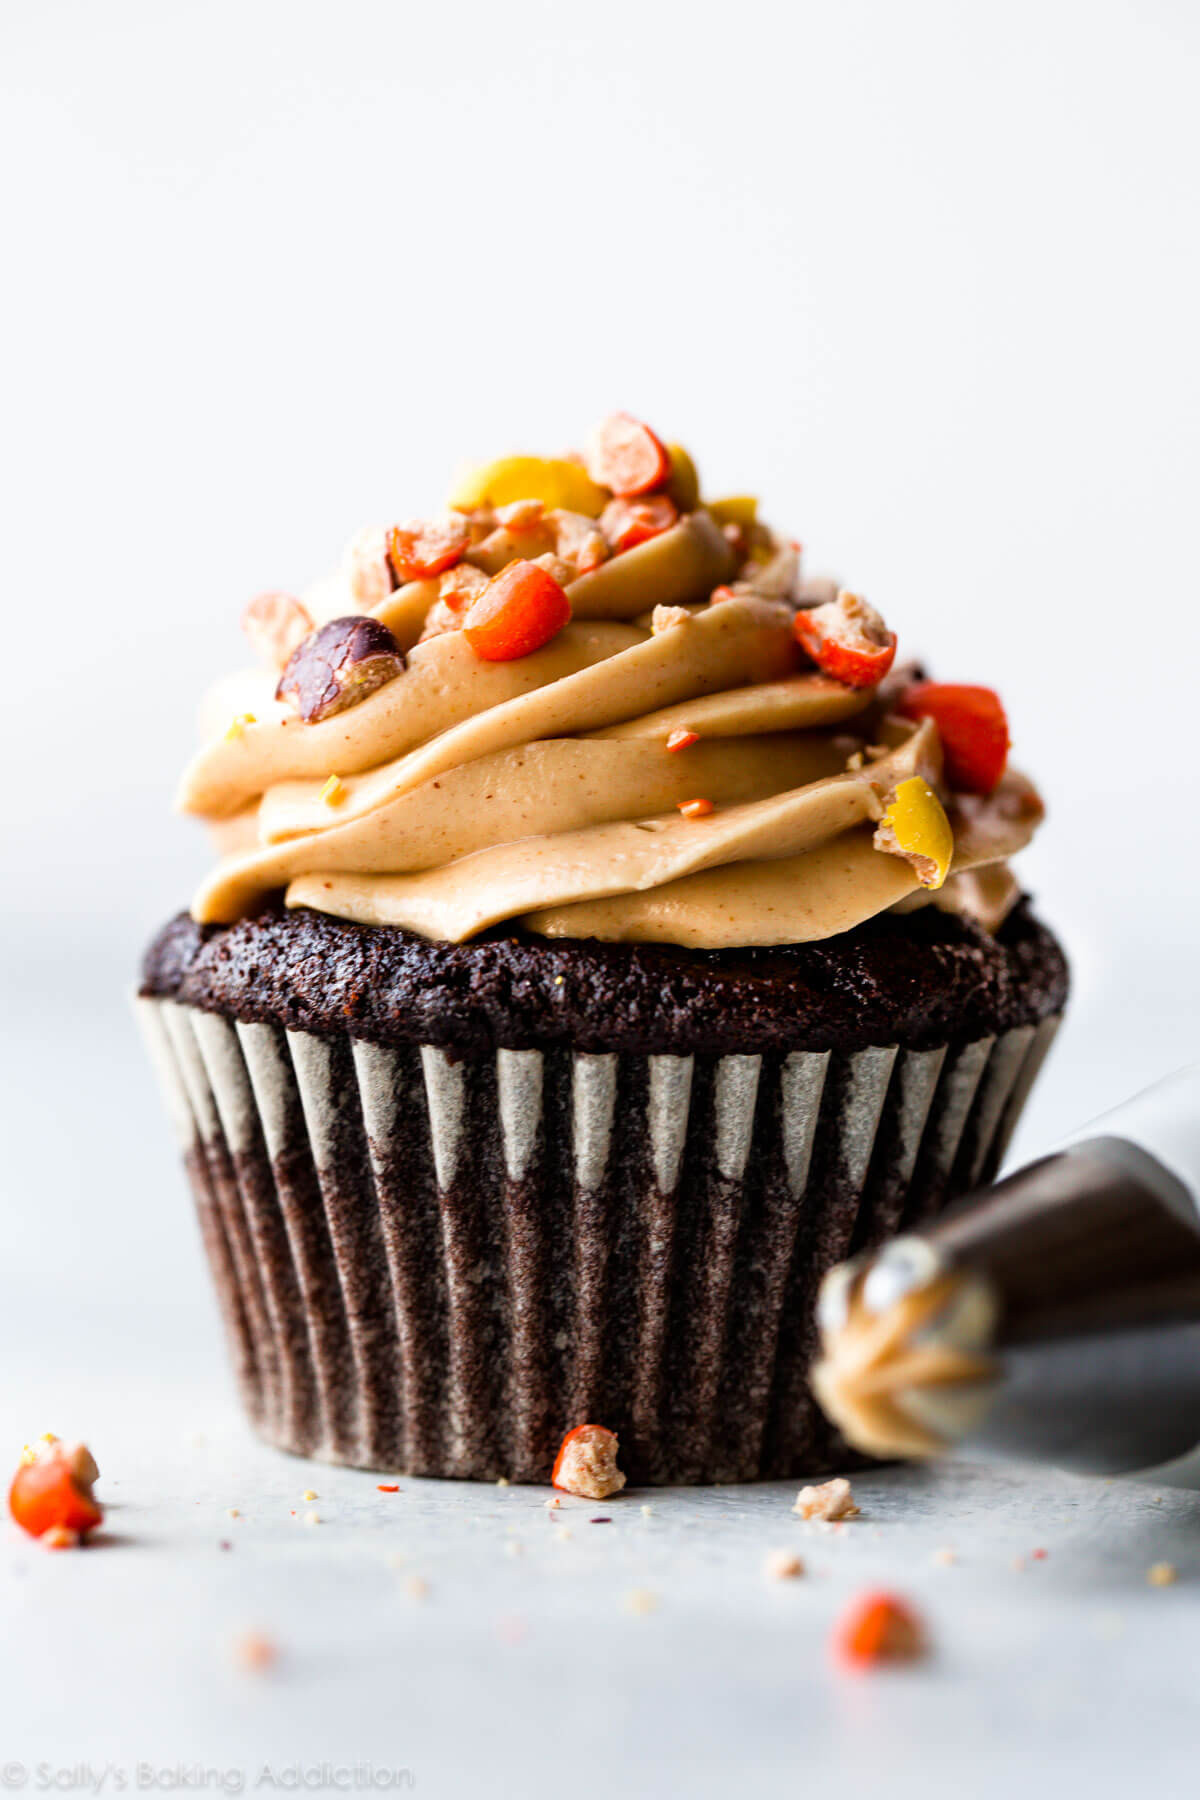 Chocolate Cupcakes With Peanut Butter Frosting
 Dark Chocolate Cupcakes with Creamy Peanut Butter Frosting